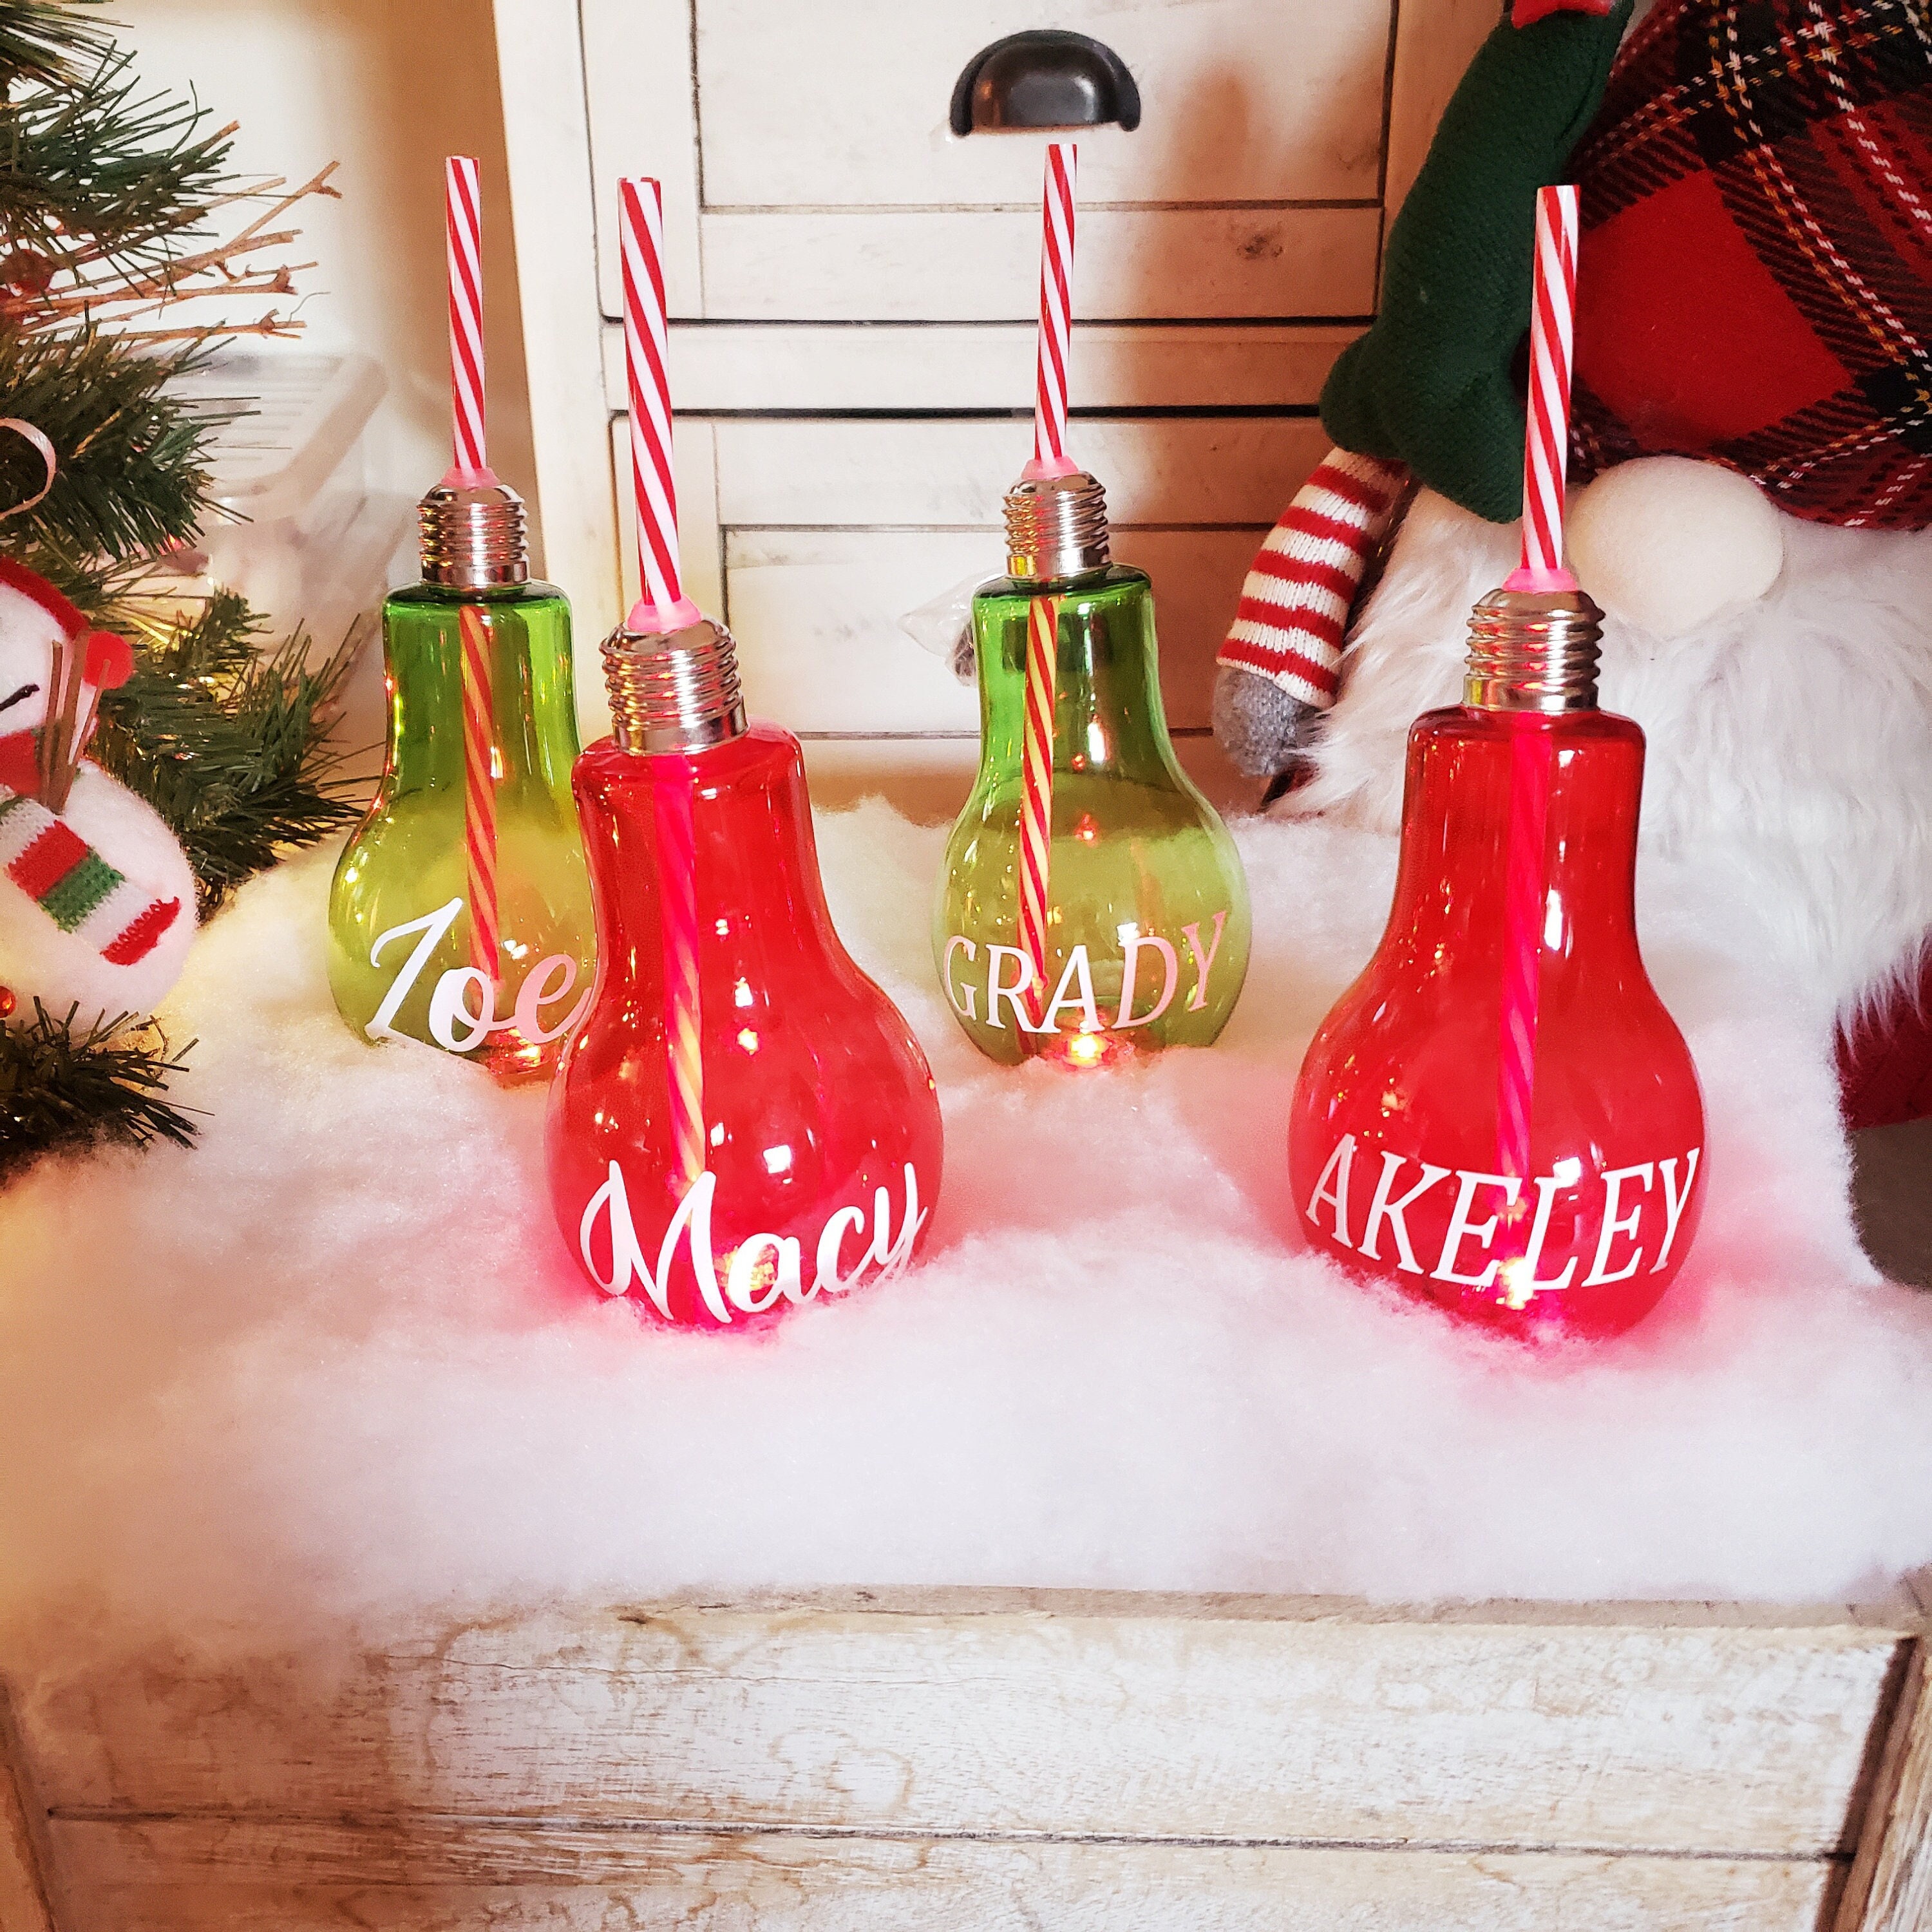 BFL Christmas Light-Up Tumblers with Straws, 18oz North Pole, and Season to  Sparkle Design Insulated…See more BFL Christmas Light-Up Tumblers with